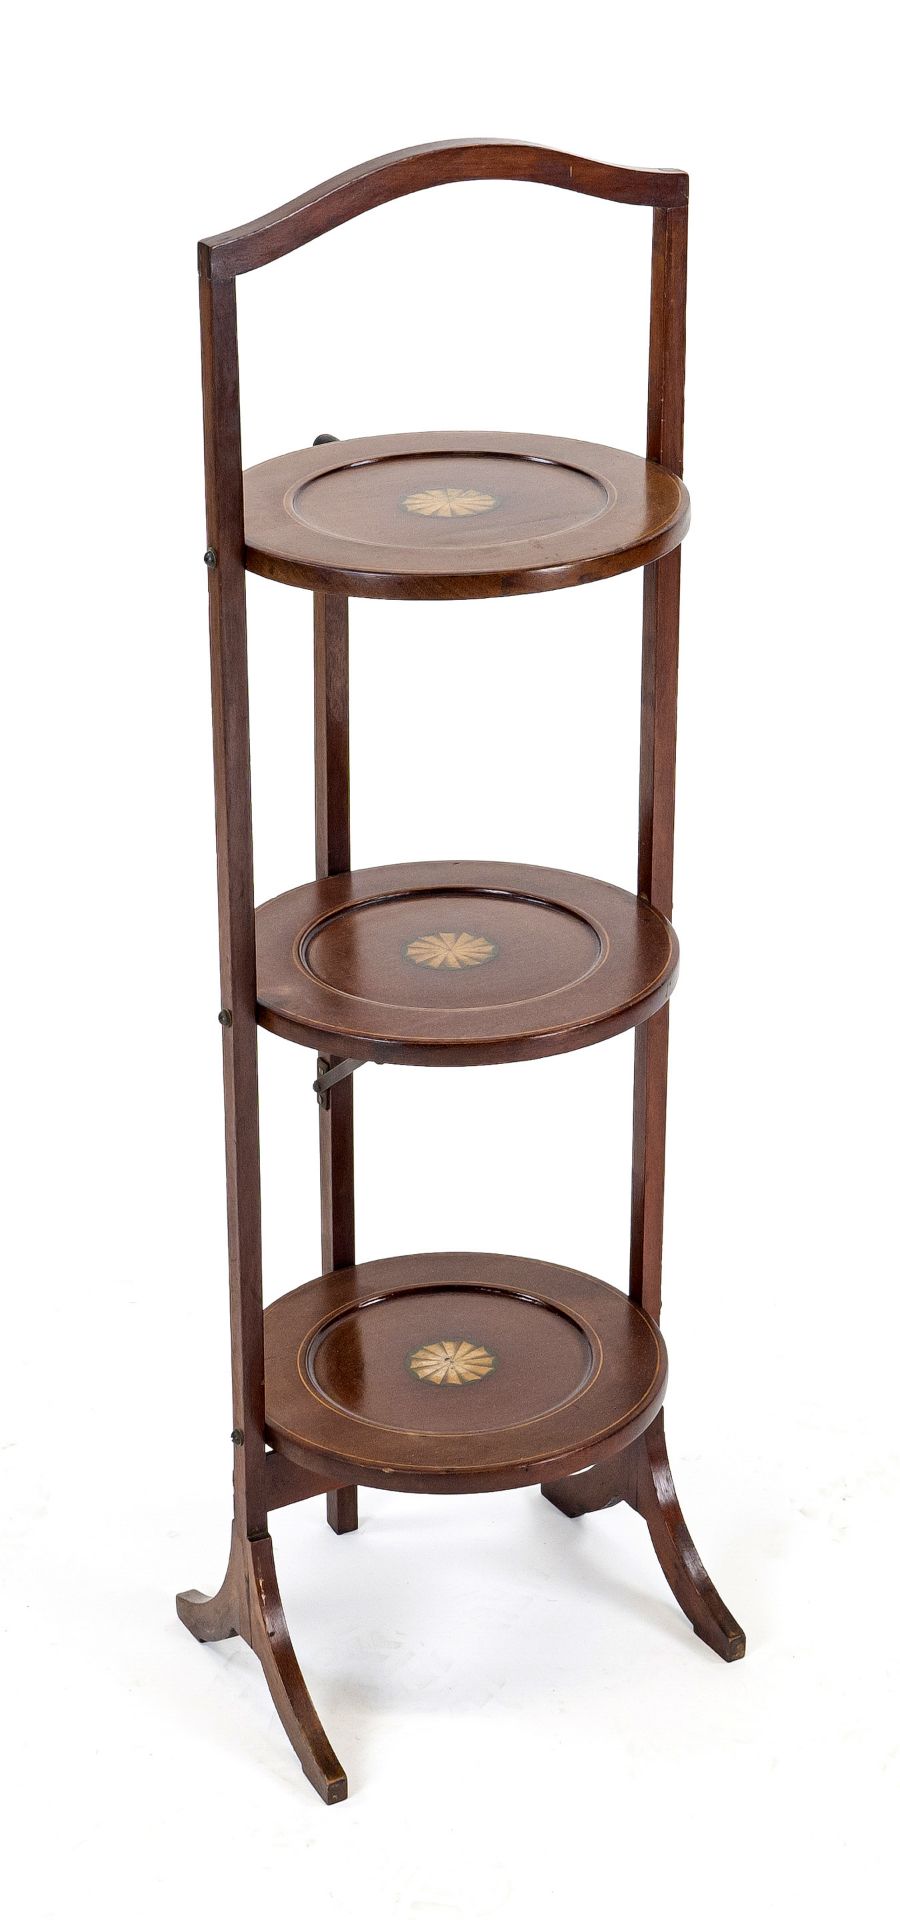 English plate shelf, 19th century, mahogany with inlays, collapsible, h. 85 cm, d. 25 cm